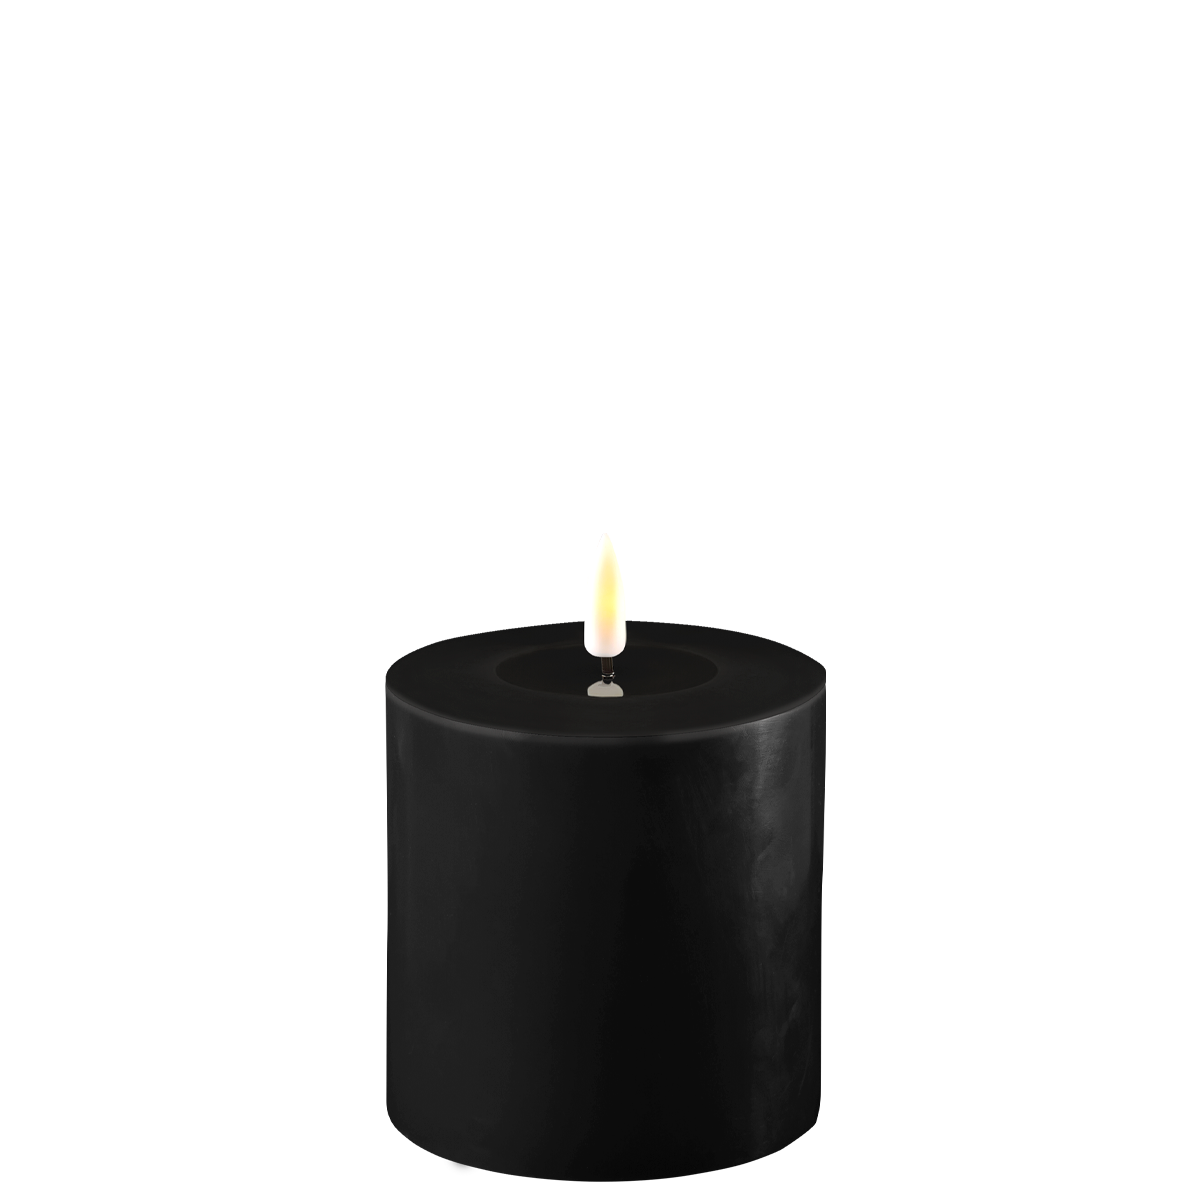 deluxe home art 10cm x 10cm Black Battery Operated LED Candle